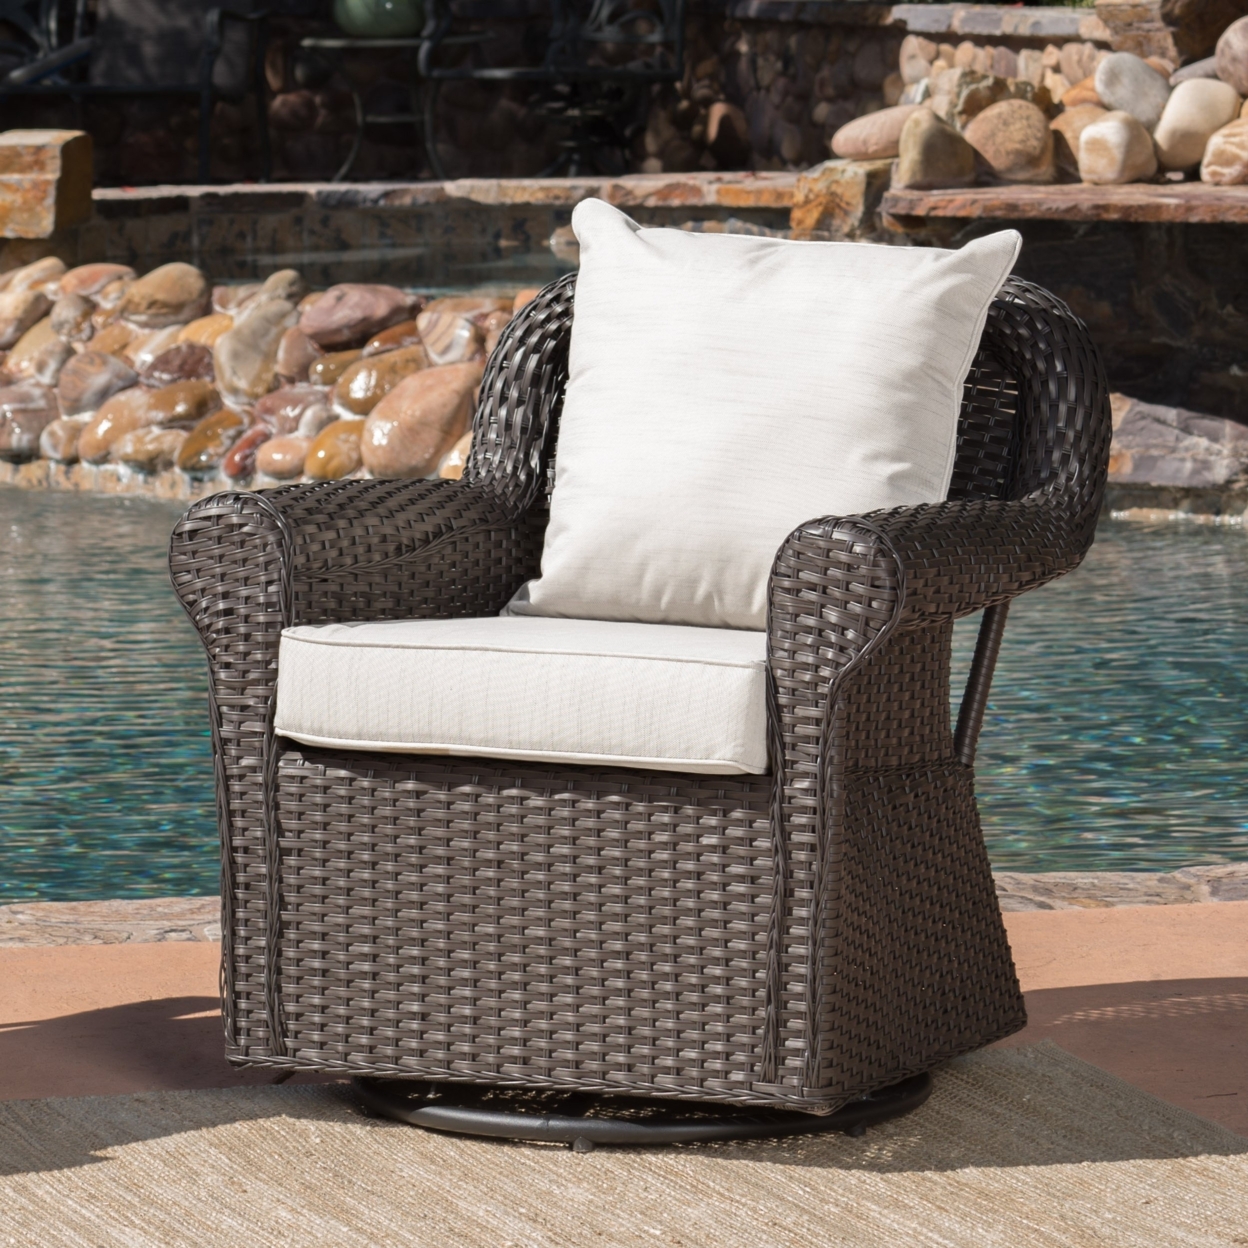 Admiral Outdoor Wicker Swivel Rocking Chair WithWater Resistant Cushions - Dark Brown, Set Of 4